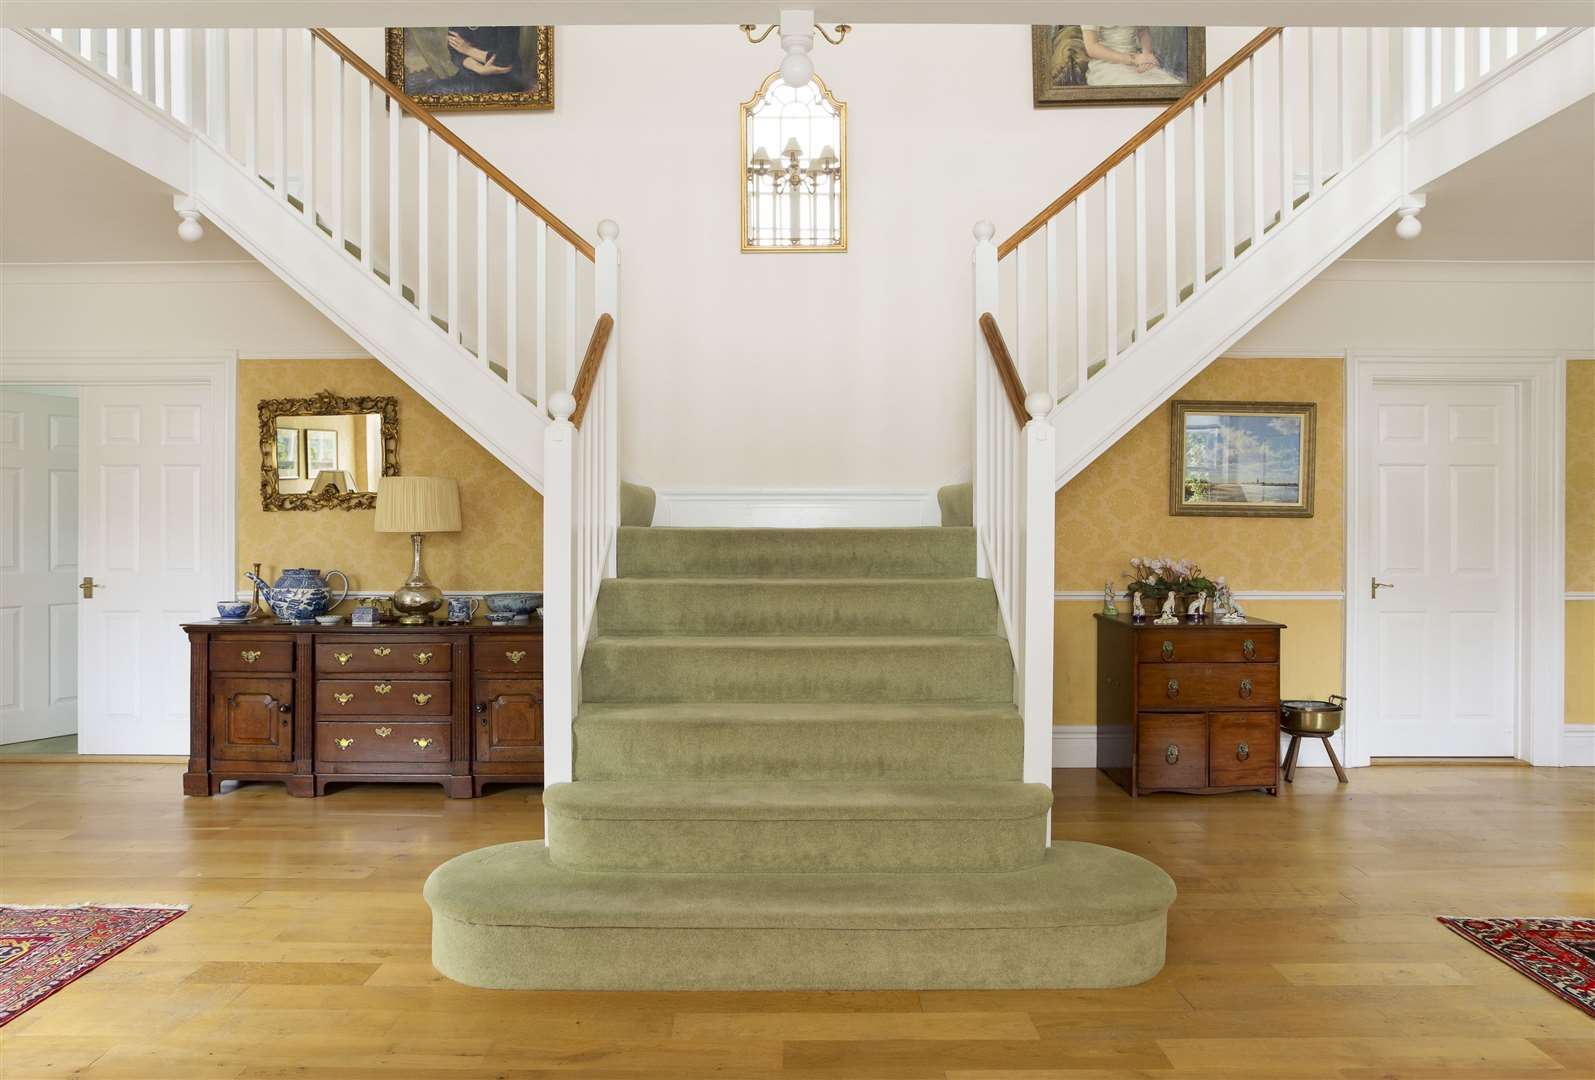 The house has a two-way, or 'bifurcating' staircase